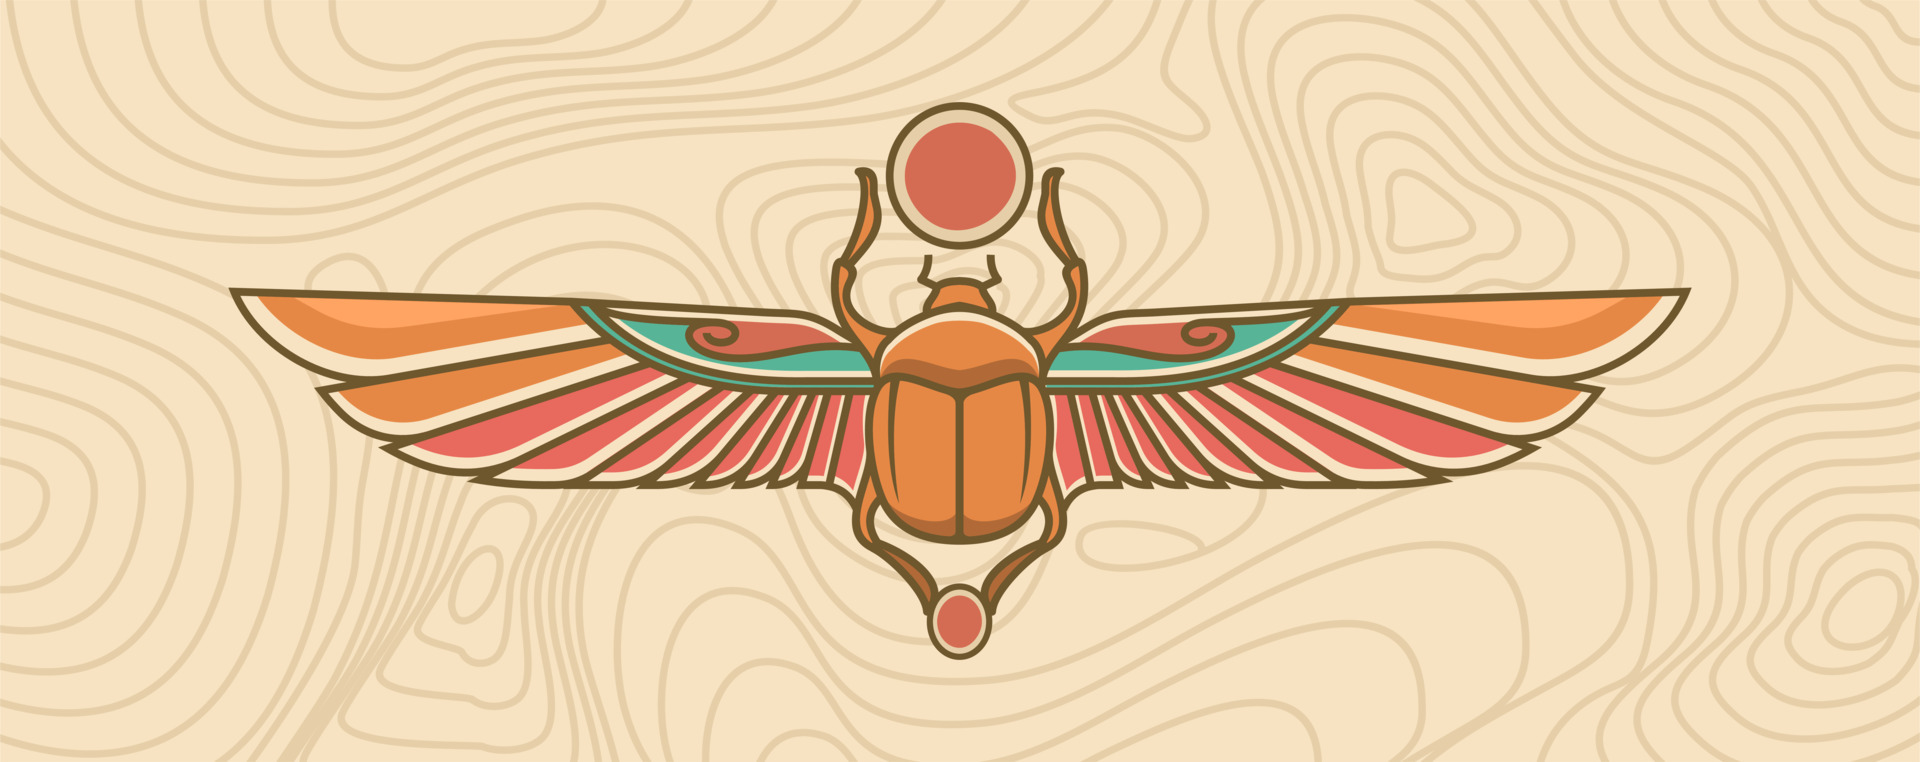 Egyptian scarab tattoo symbol of creation and emergence  Tattooing